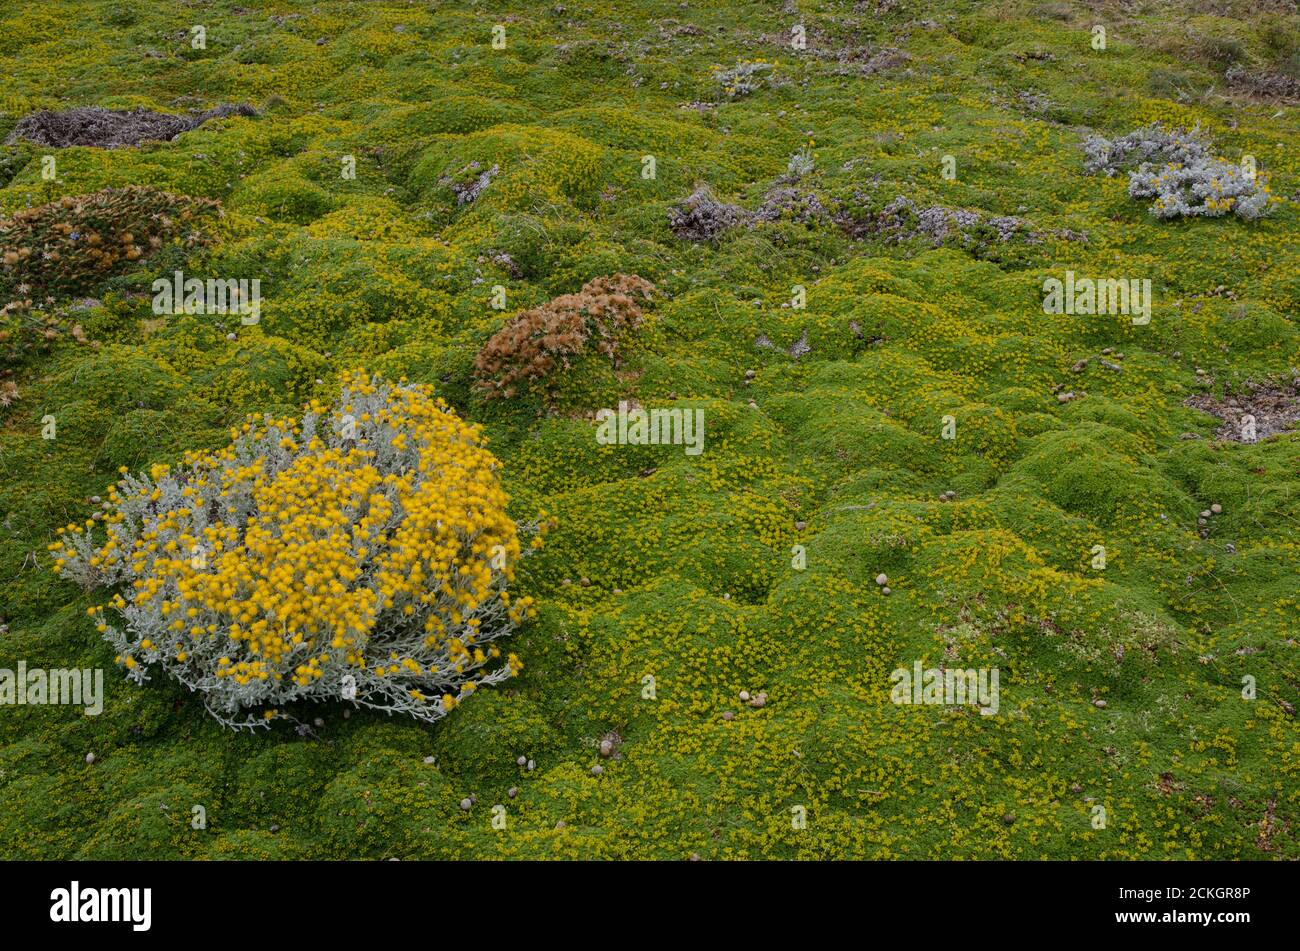 Plant of Senecio sp. in flowering and ground covered by vegetation. Otway Sound and Penguin Reserve. Magallanes and Chilean Antarctic Region. Chile. Stock Photo